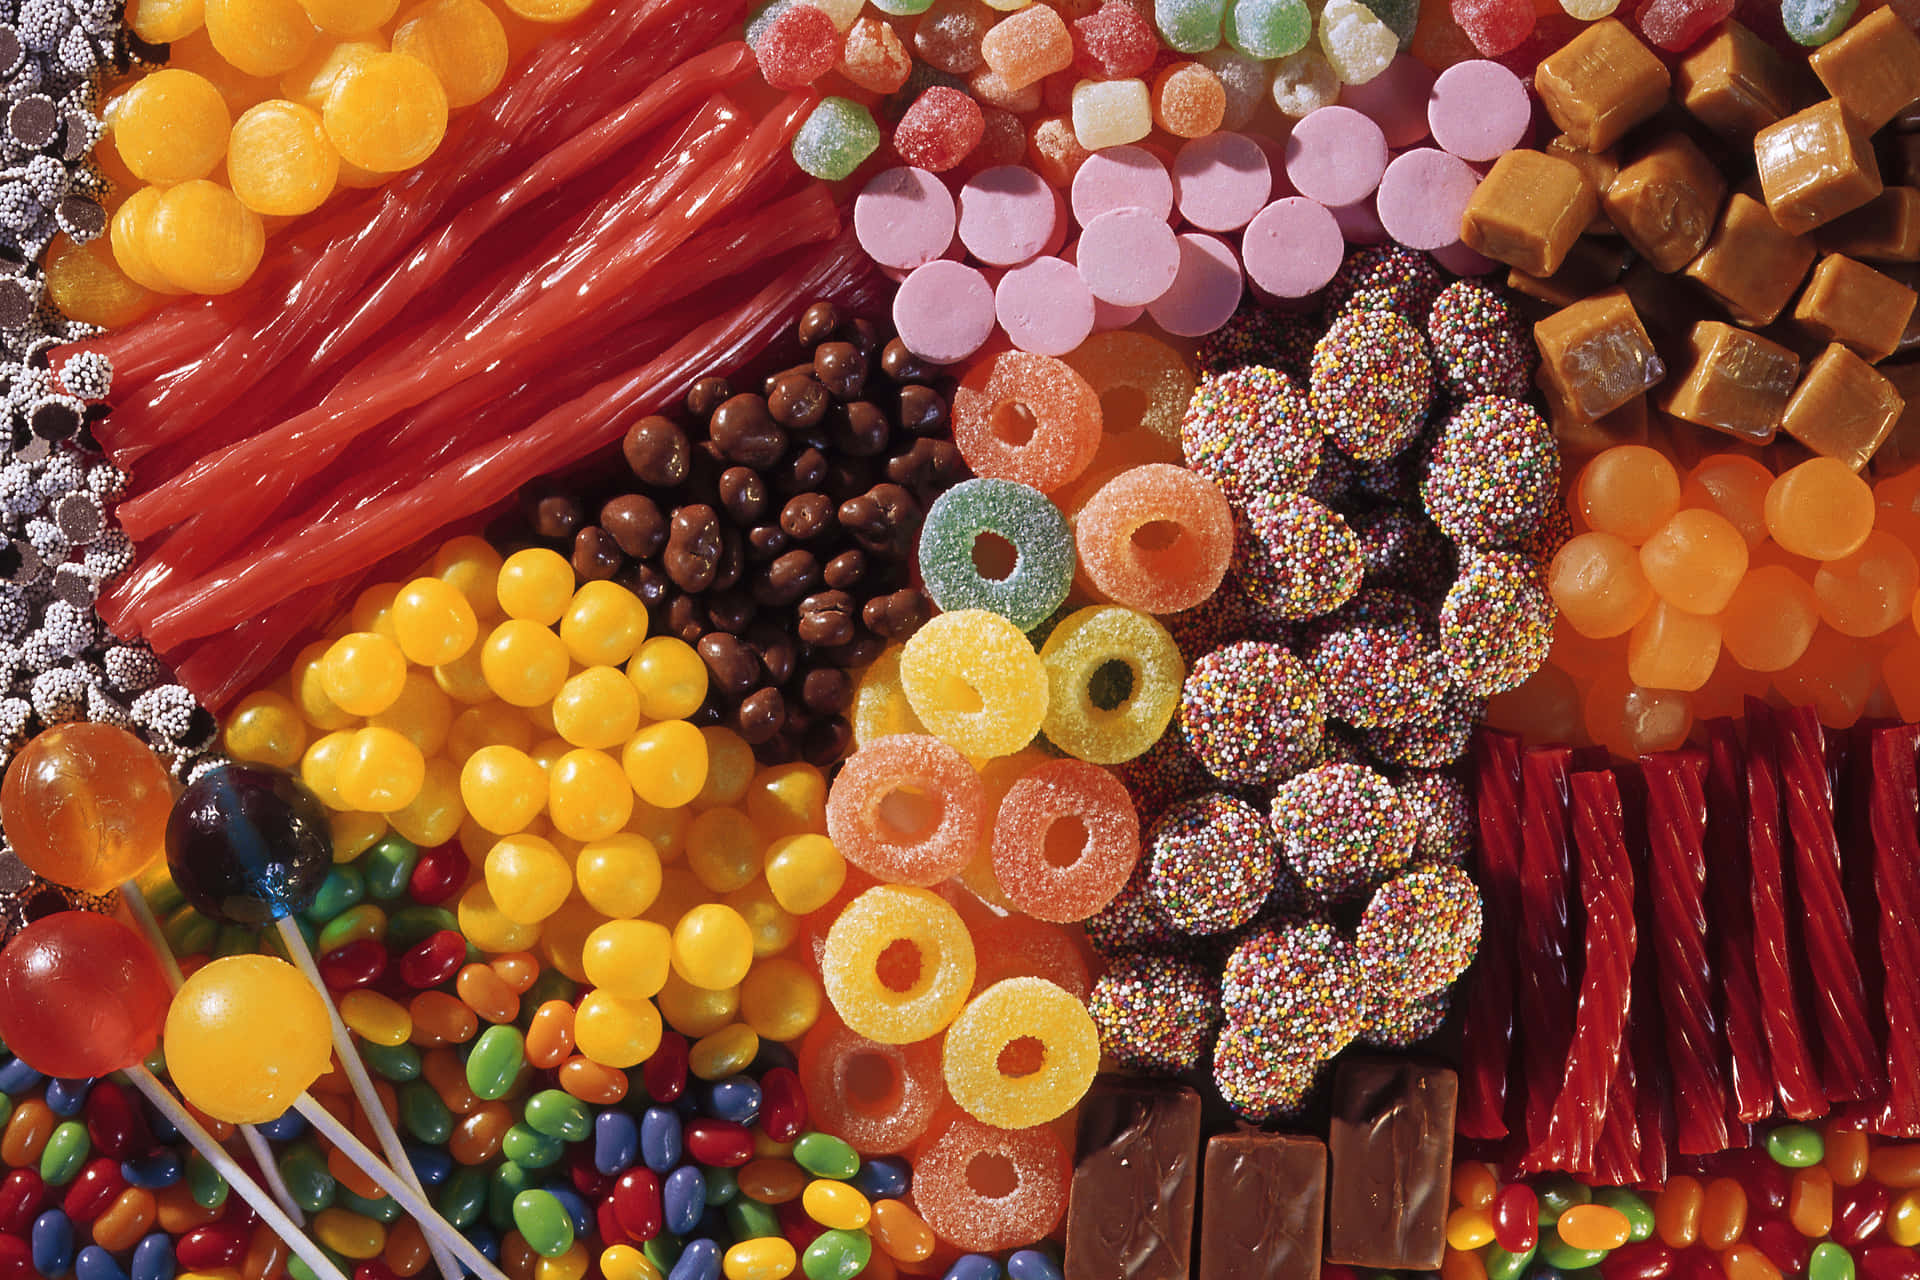 Satisfy your sweet tooth with Candy of all shapes, sizes, and types